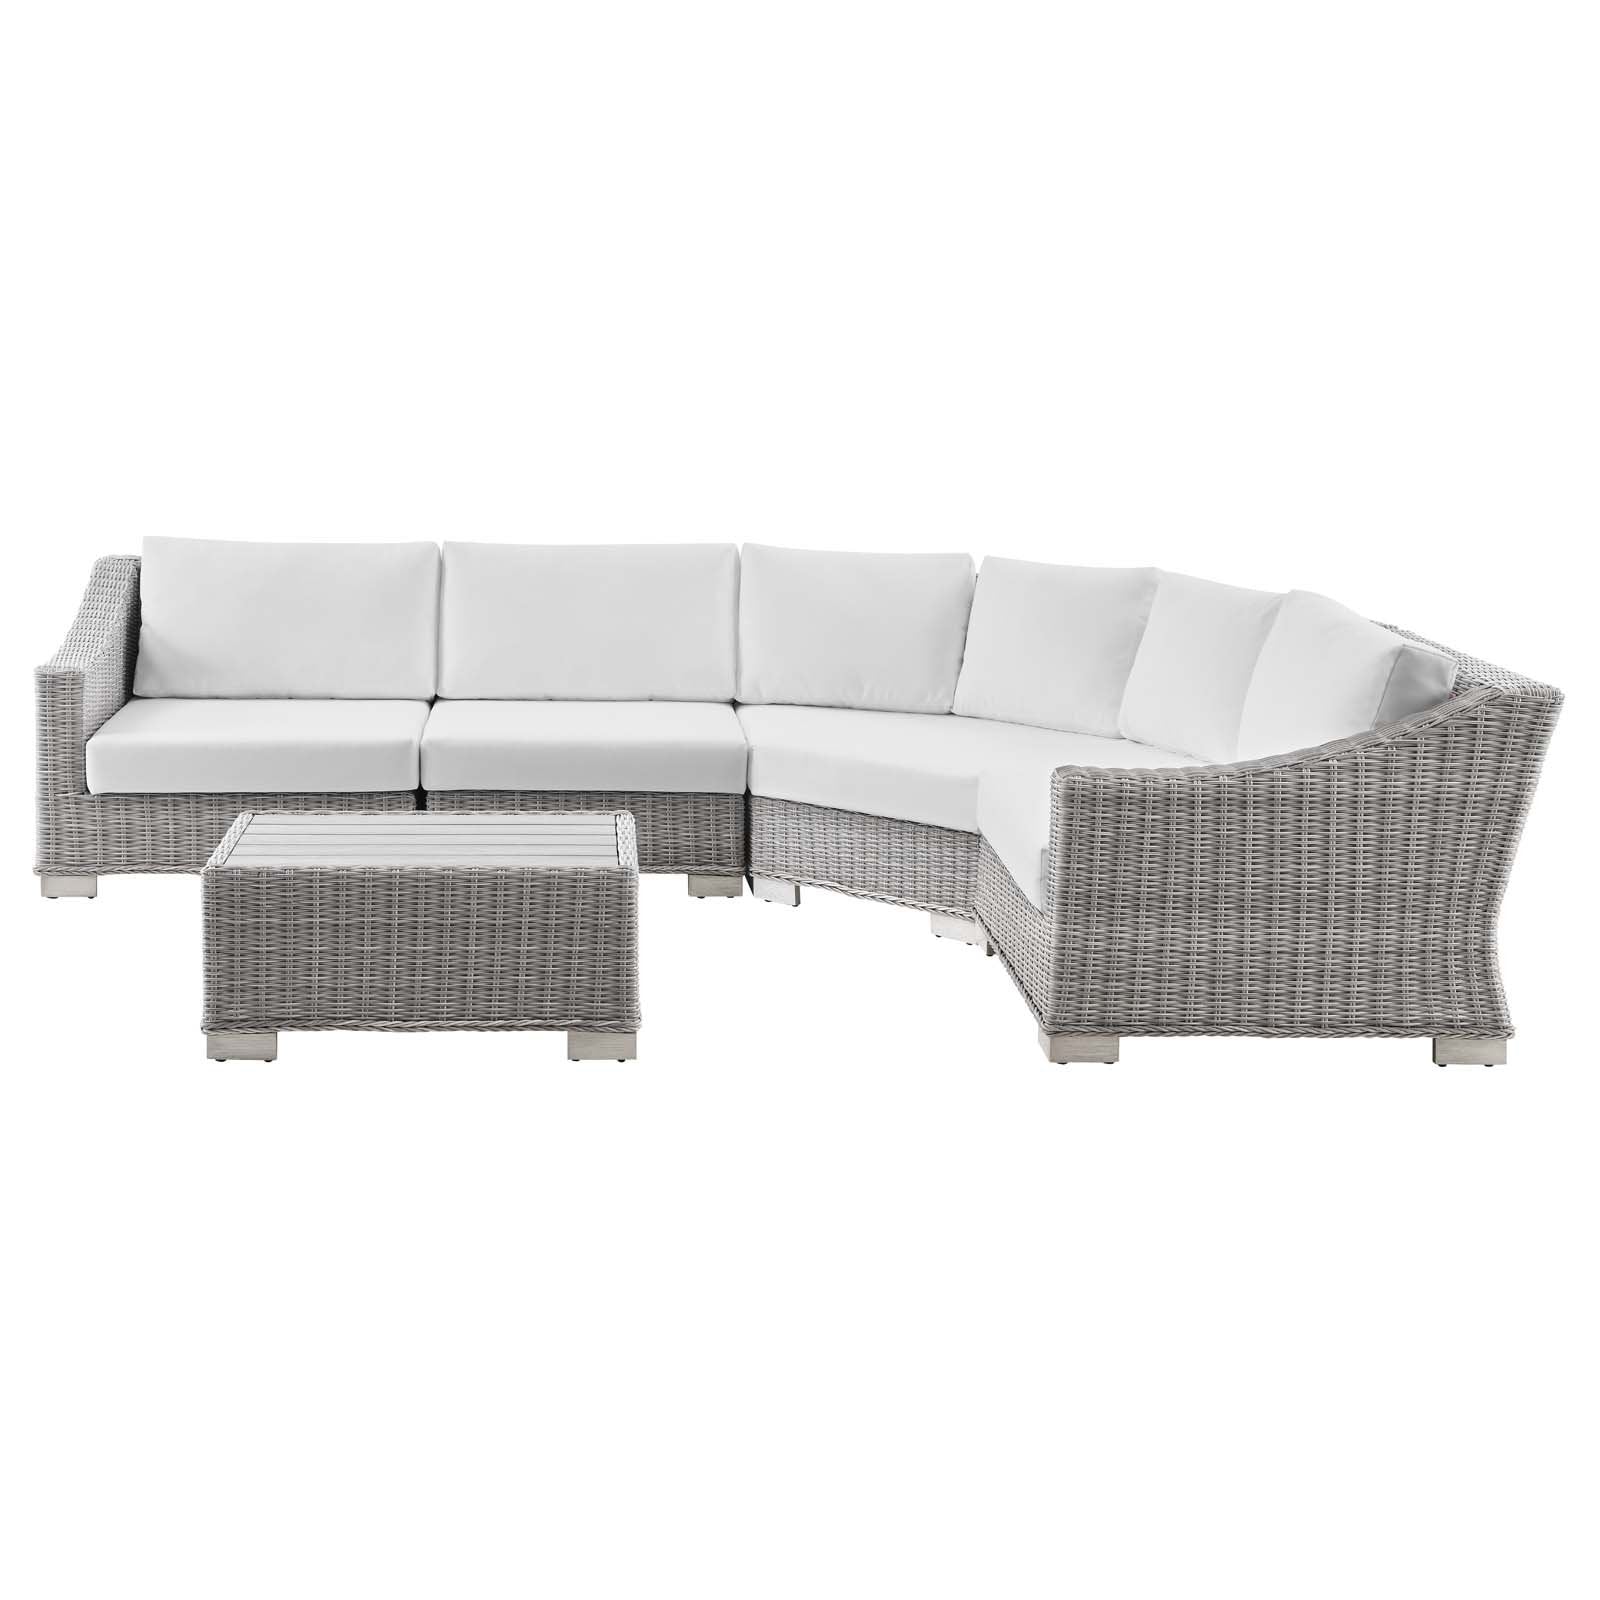 Conway Outdoor Patio Wicker Rattan 5-Piece Sectional Sofa Furniture Set - East Shore Modern Home Furnishings